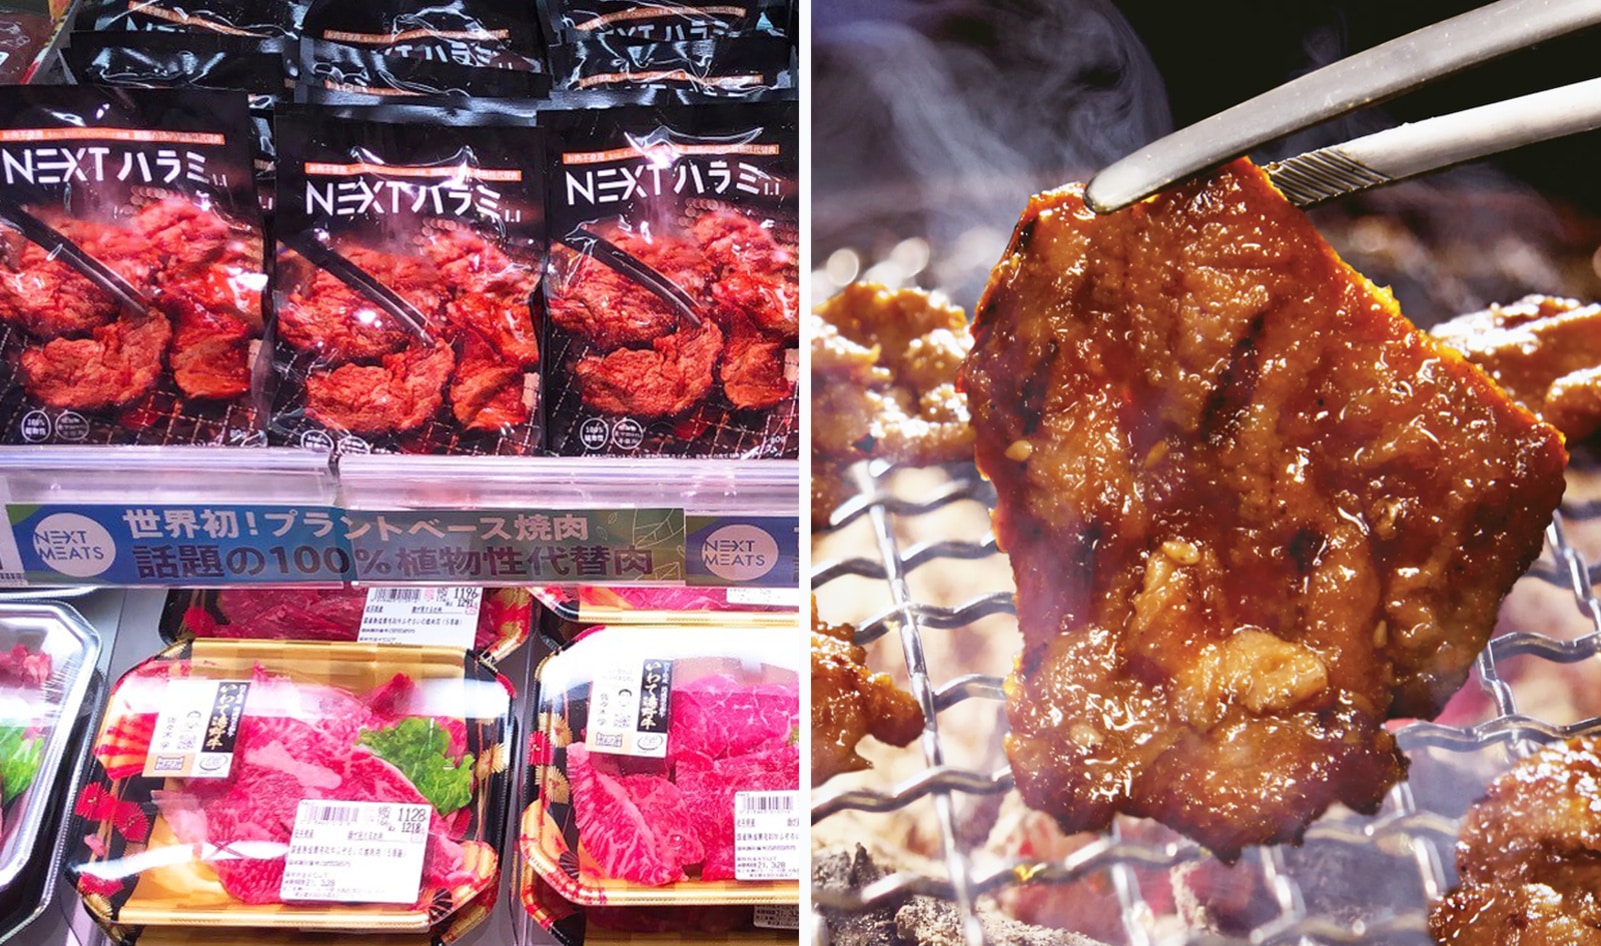 Vegan Short Ribs Just Launched at Supermarkets in Japan